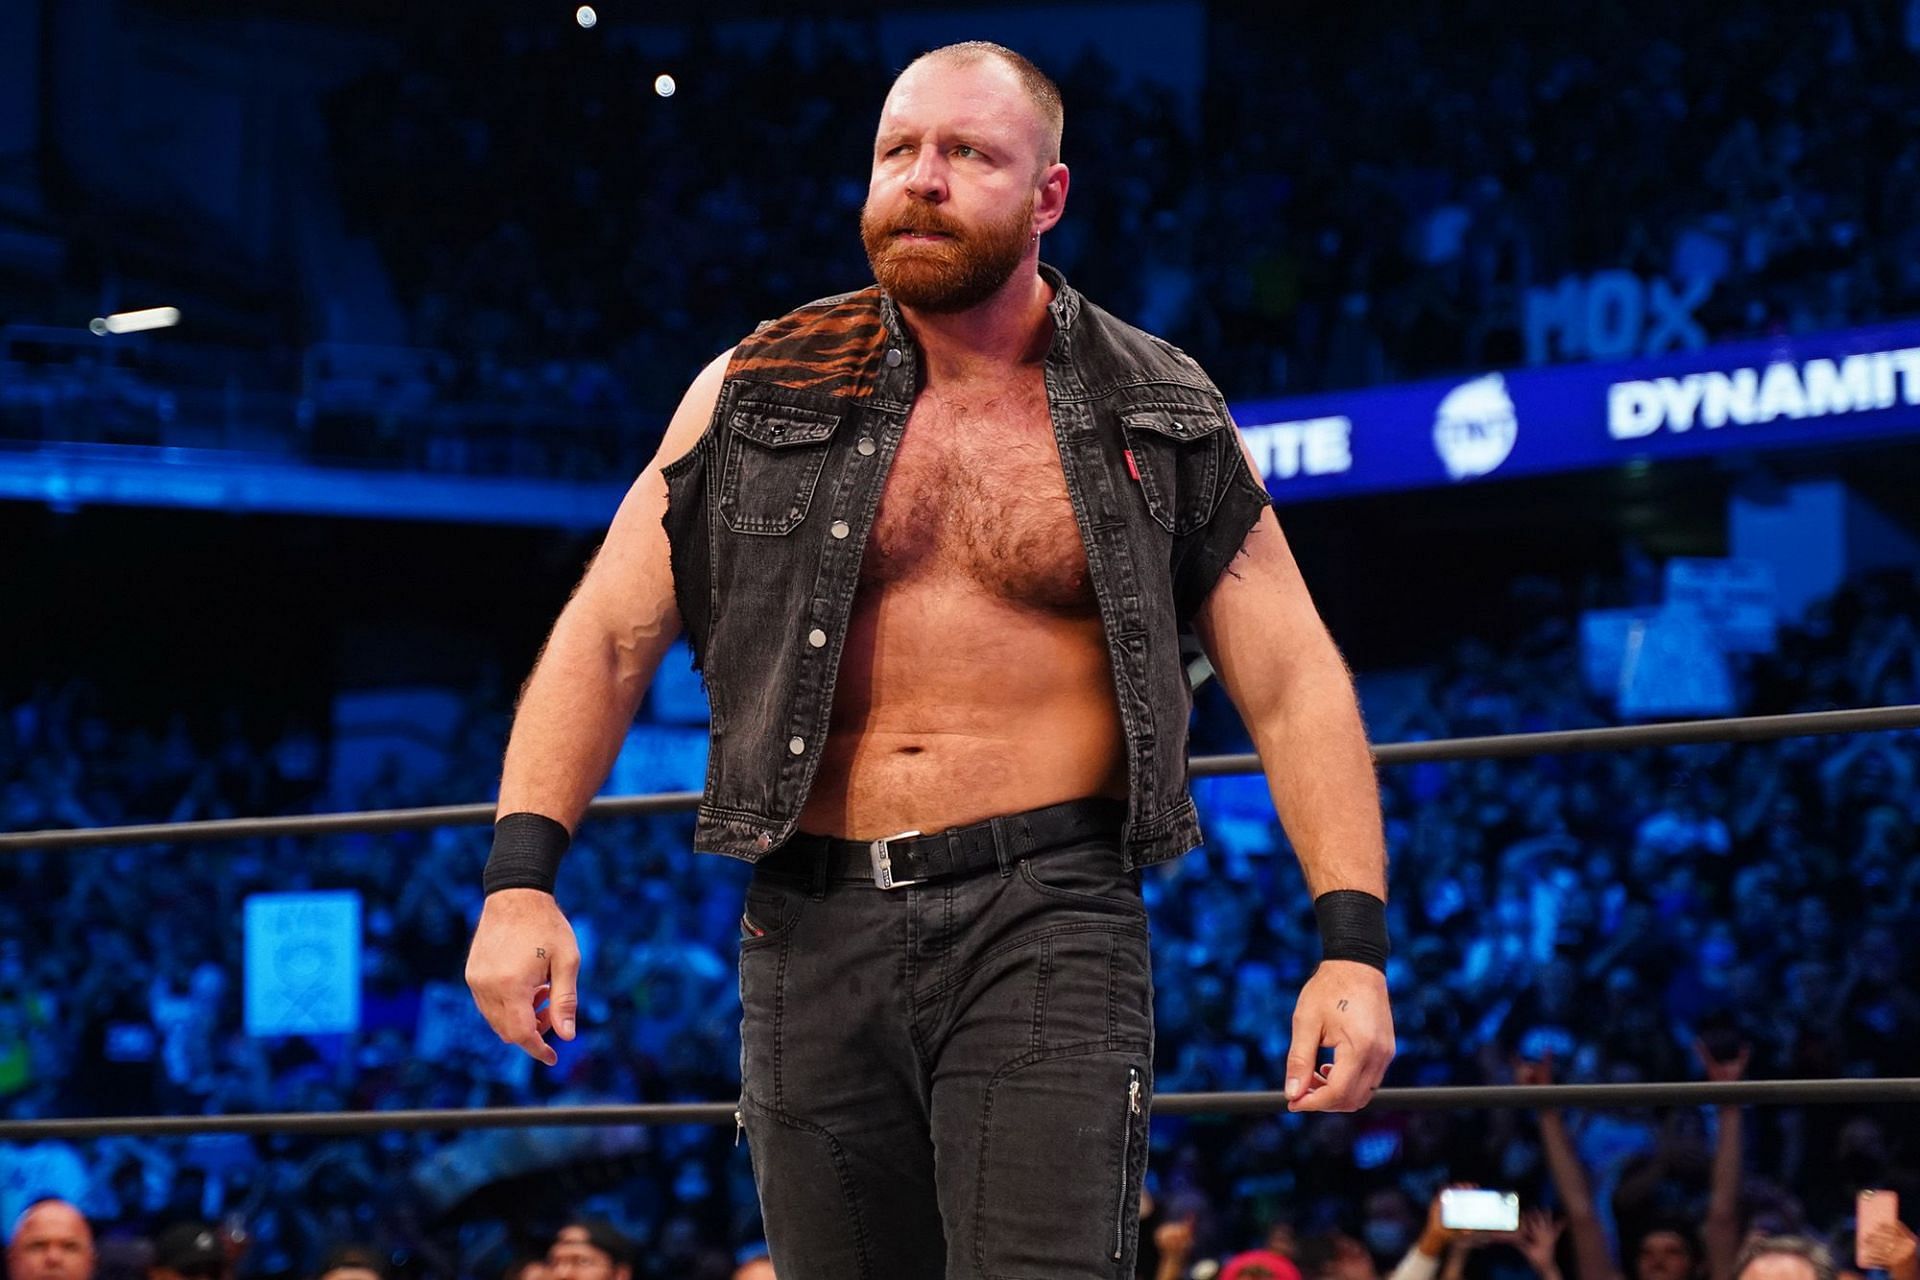 Jon Moxley has a chance to compete at Forbidden Door